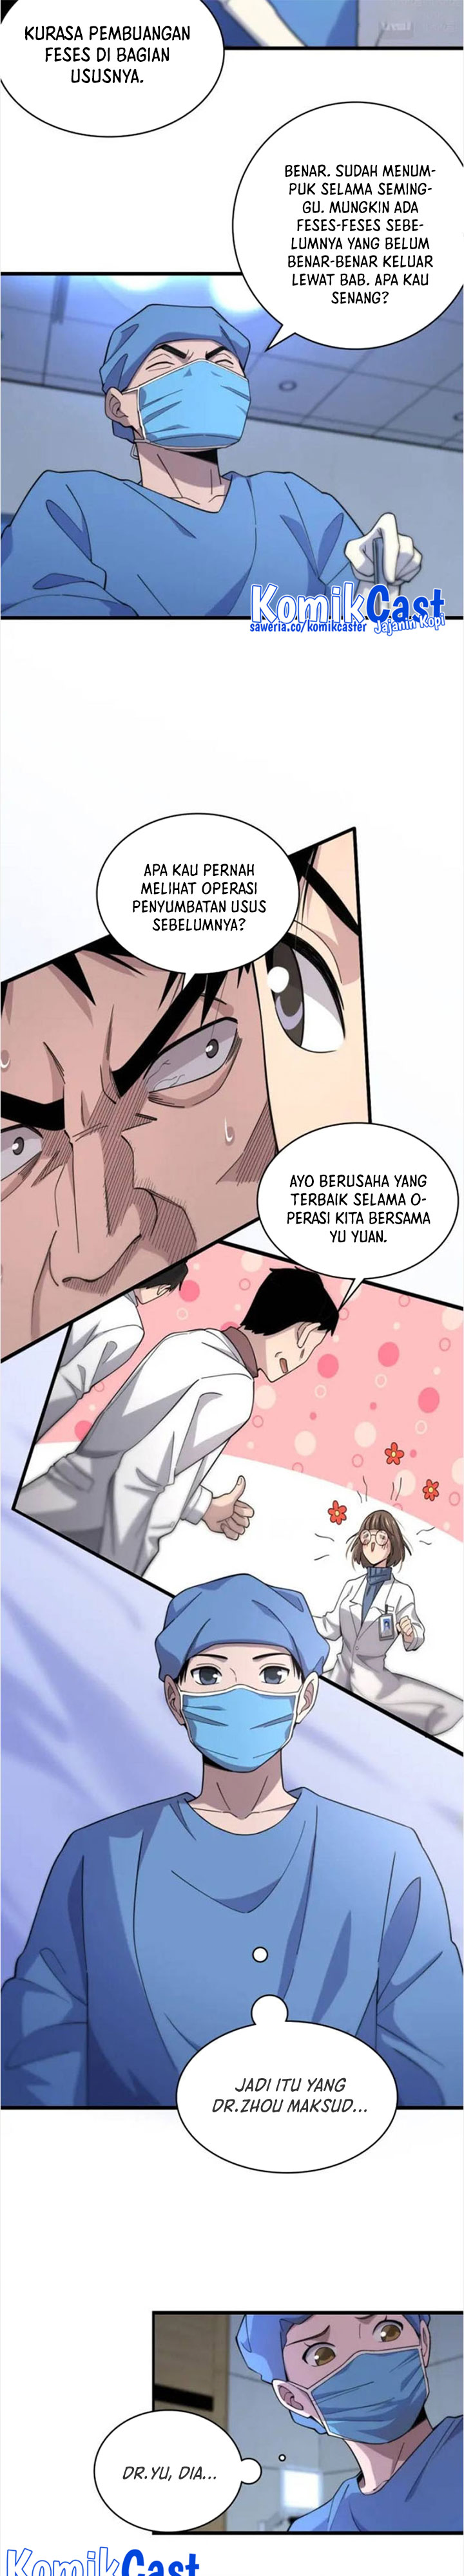 Great Doctor Ling Ran Chapter 66 bahasa indoensia